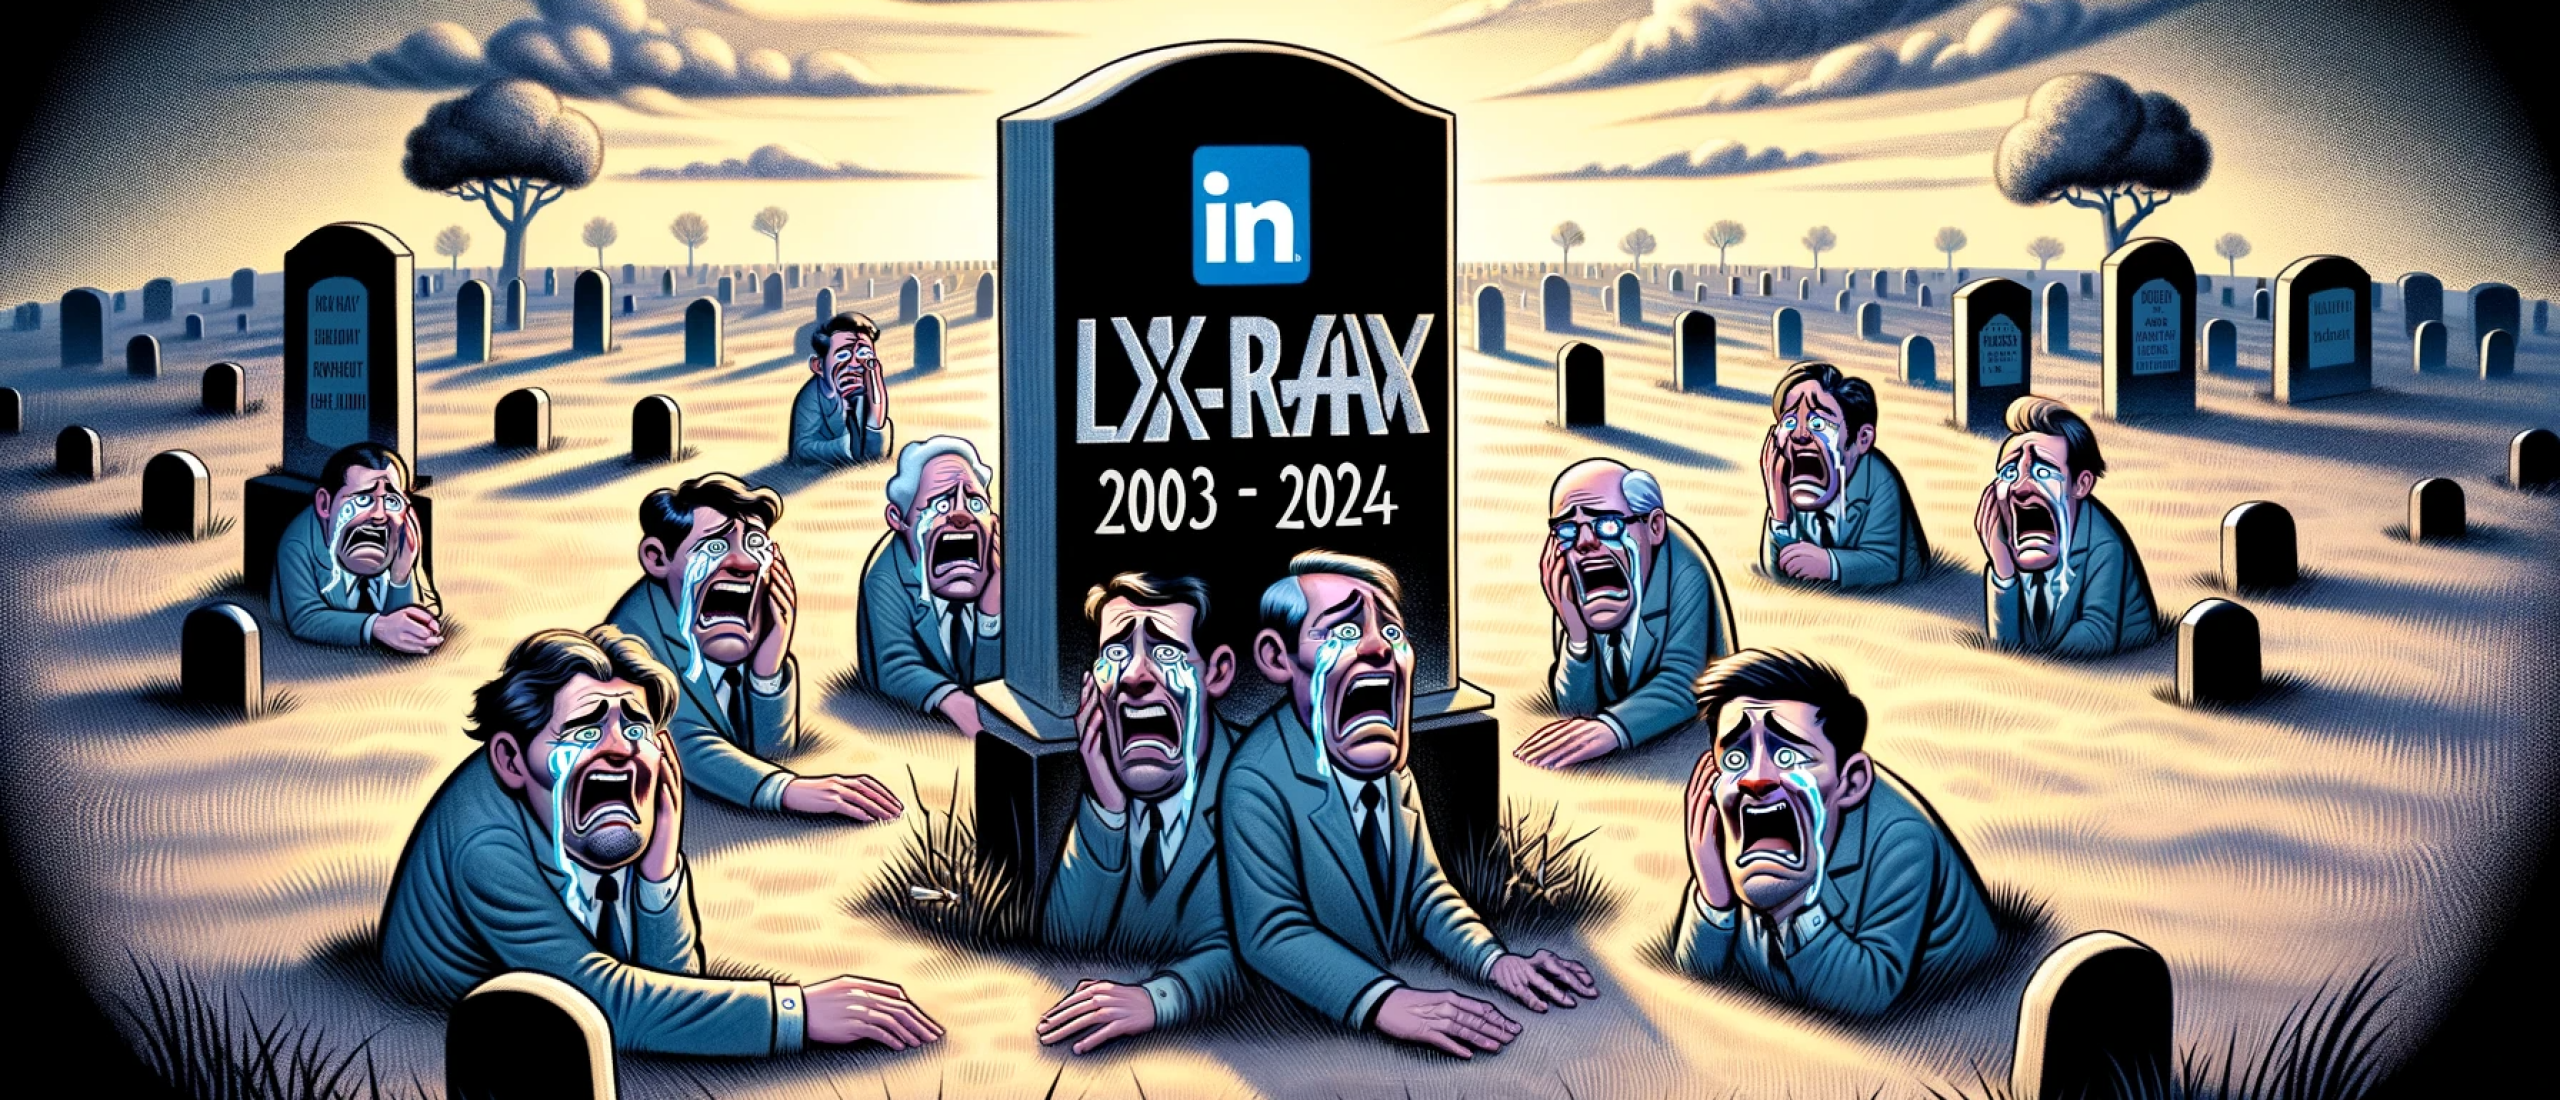 LinkedIn X-Ray is soon to be dead